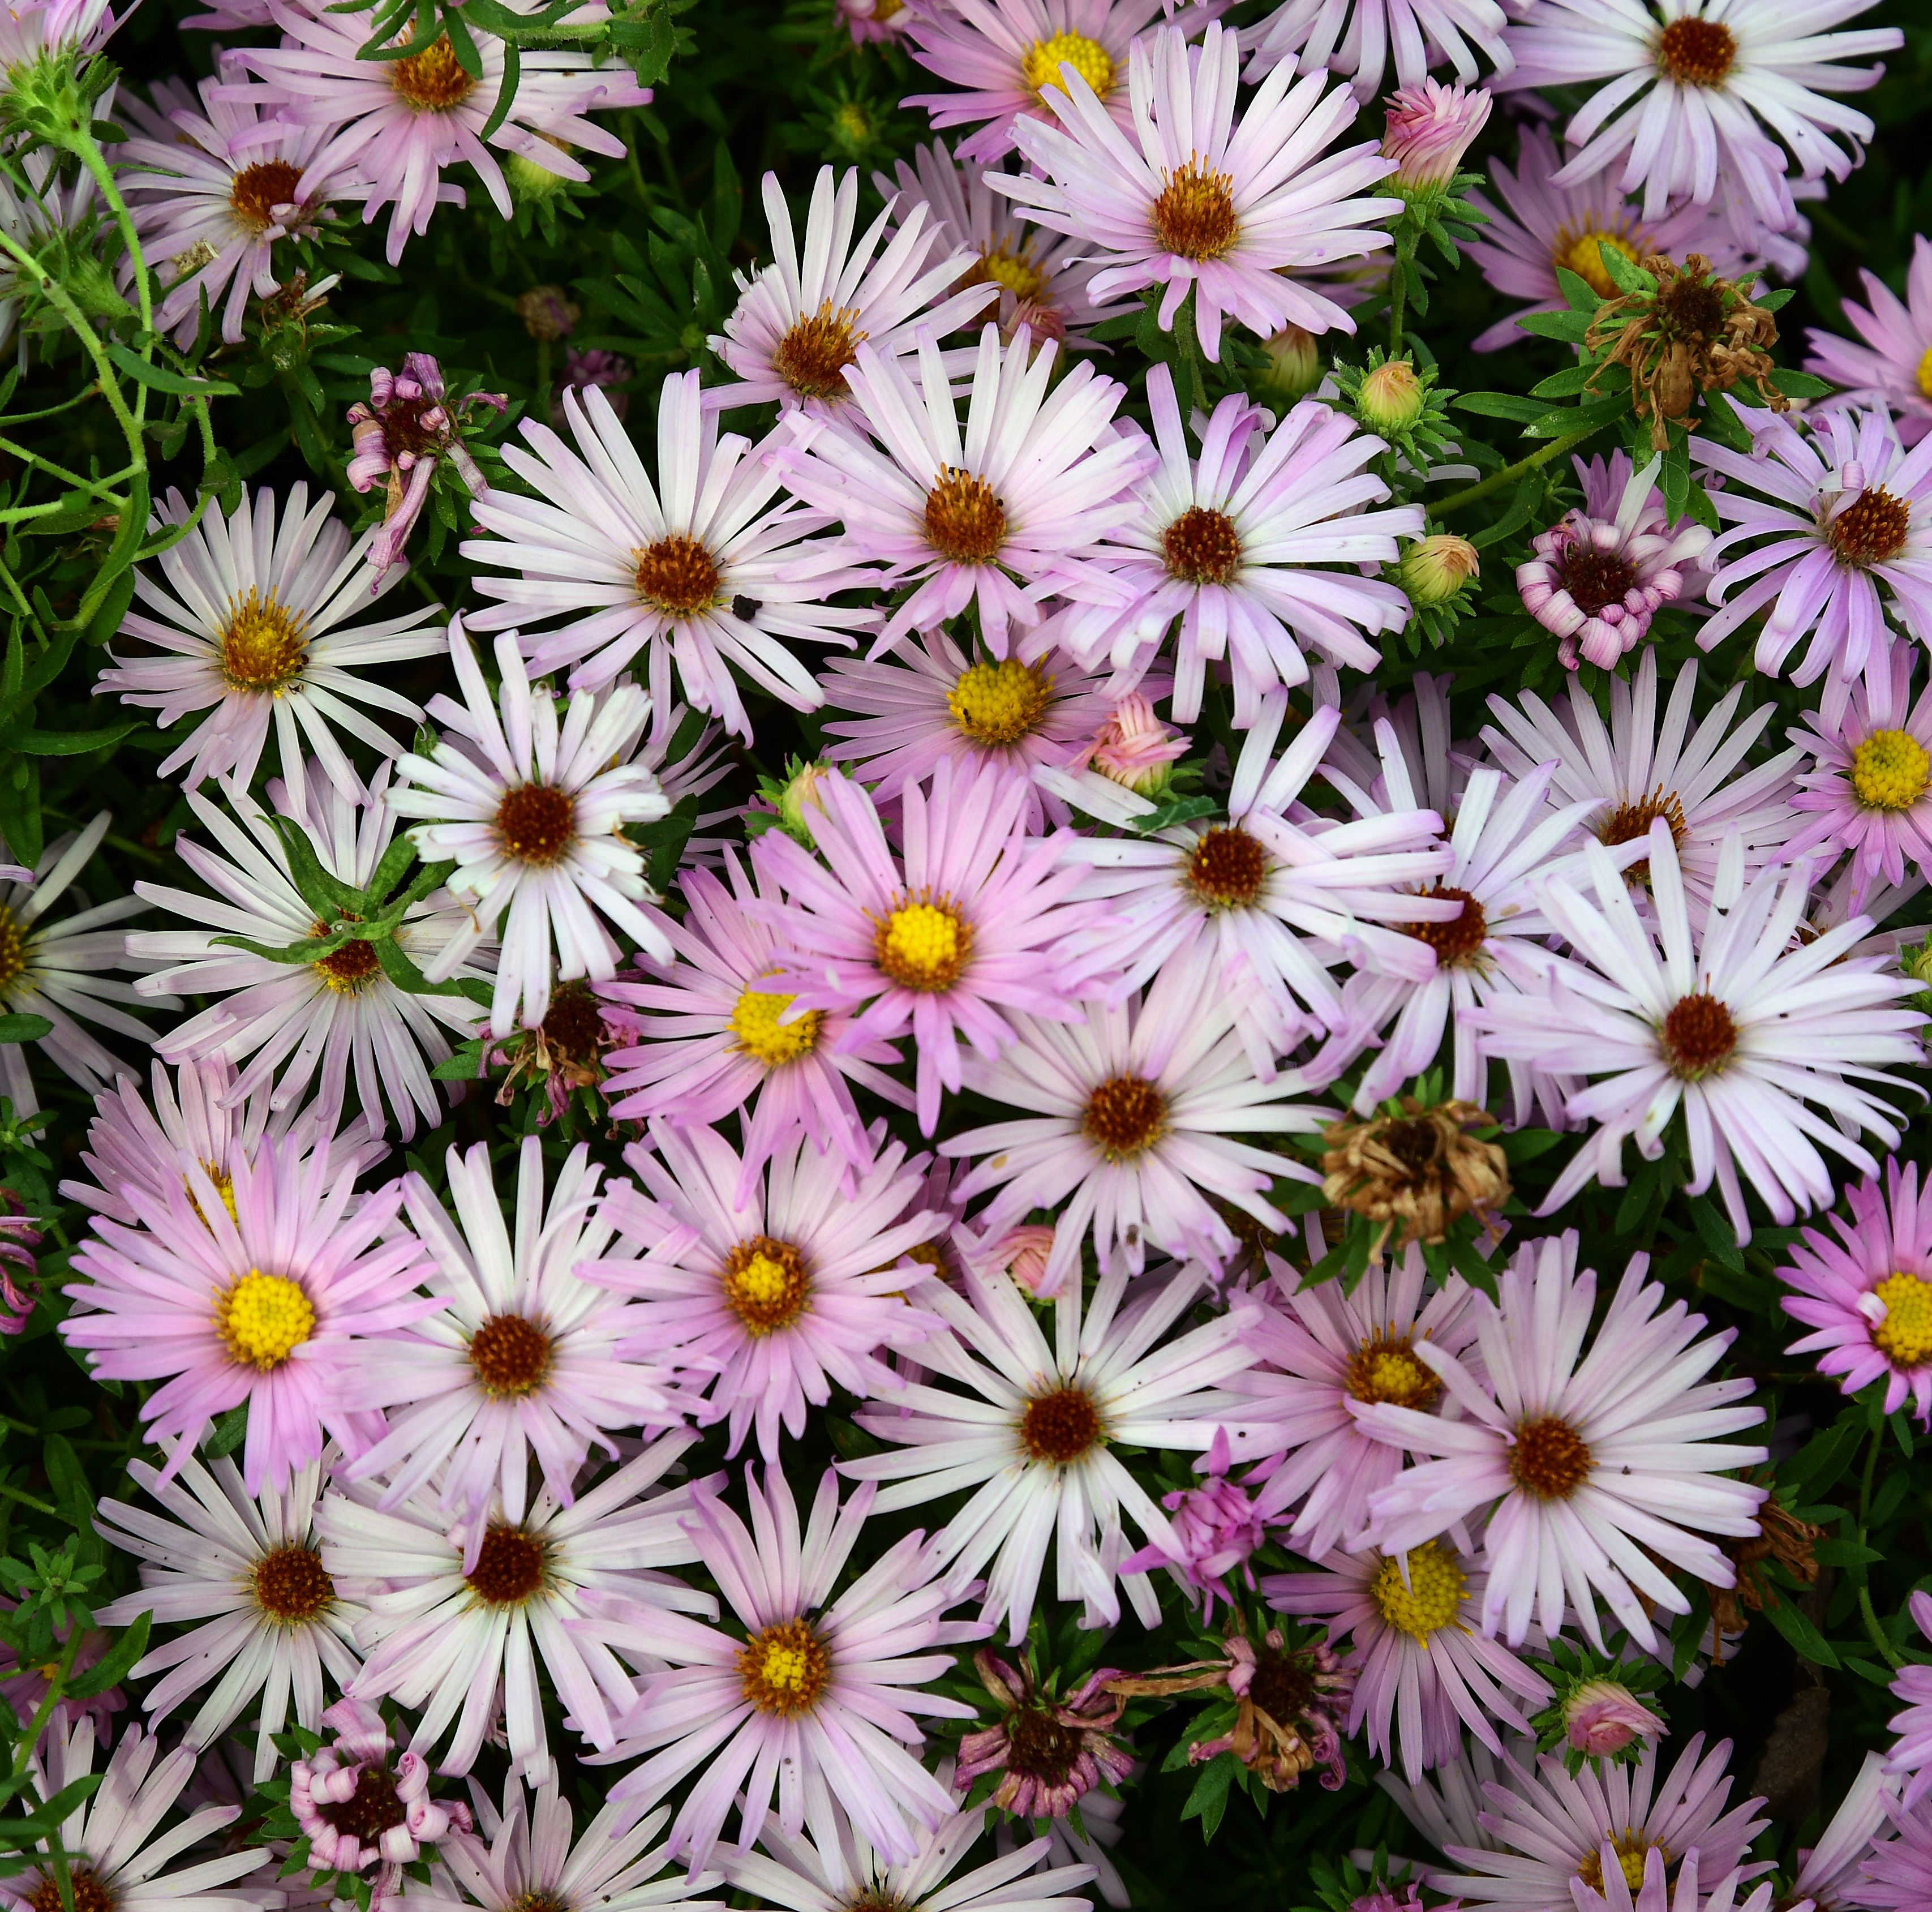 images/plants/aster/ast-cotton-candy/ast-cotton-candy-0005.jpg